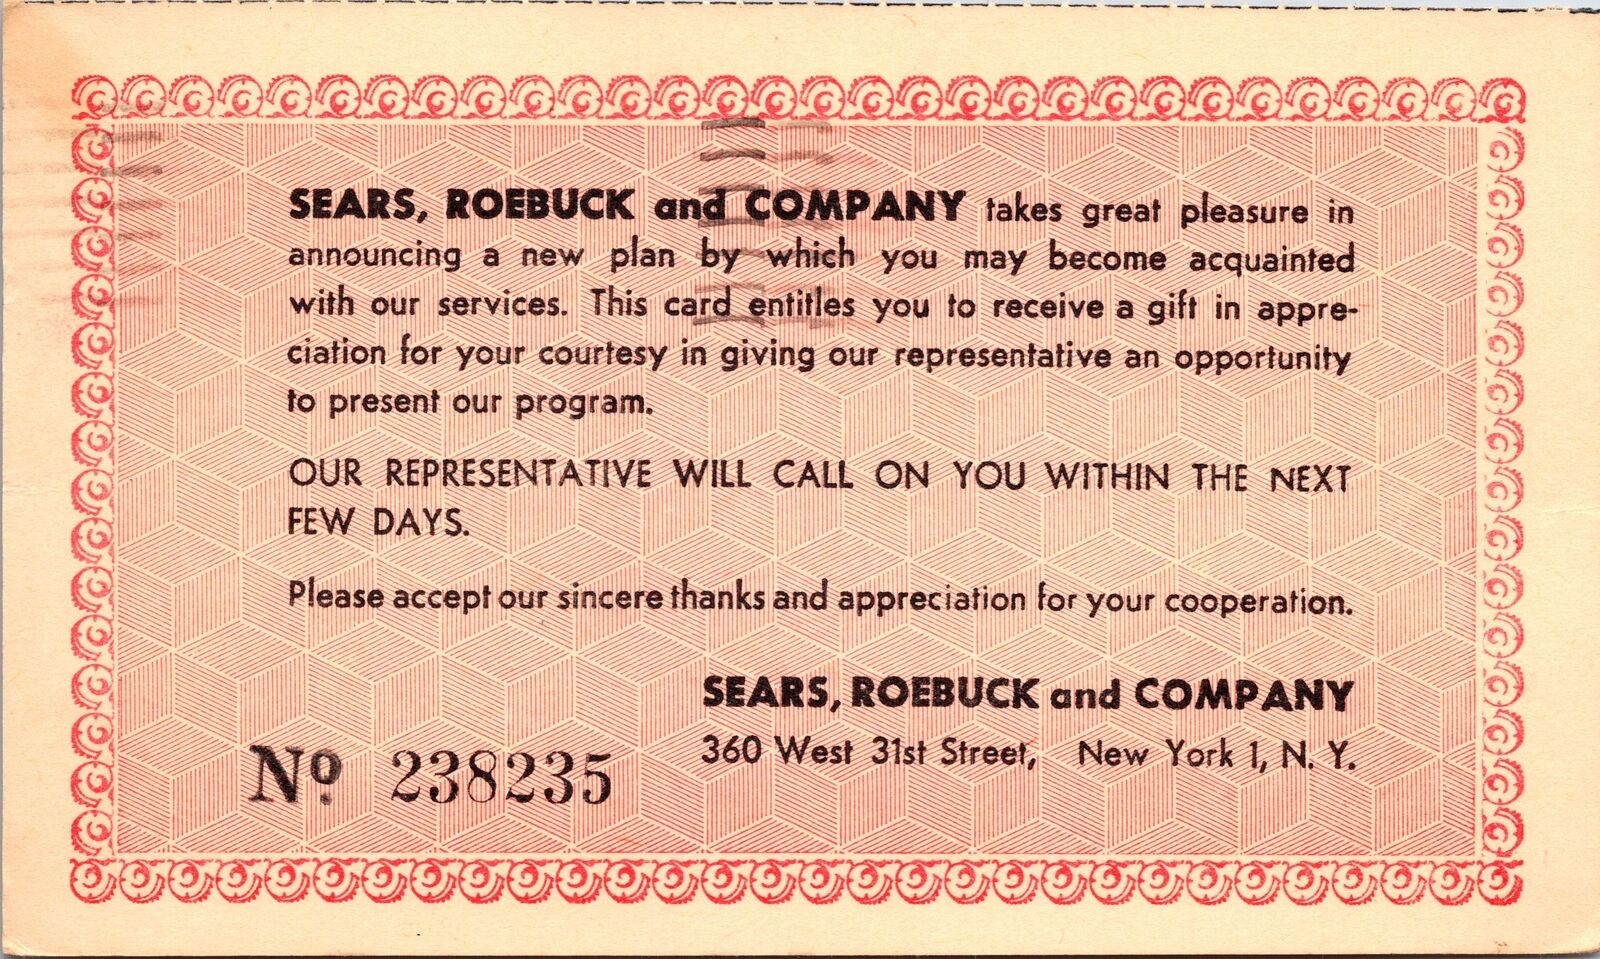 VINTAGE POSTAL CARD 1956 SEARS ROEBUCK AND COMPANY COUPON NUMBERED NEW YORK NY